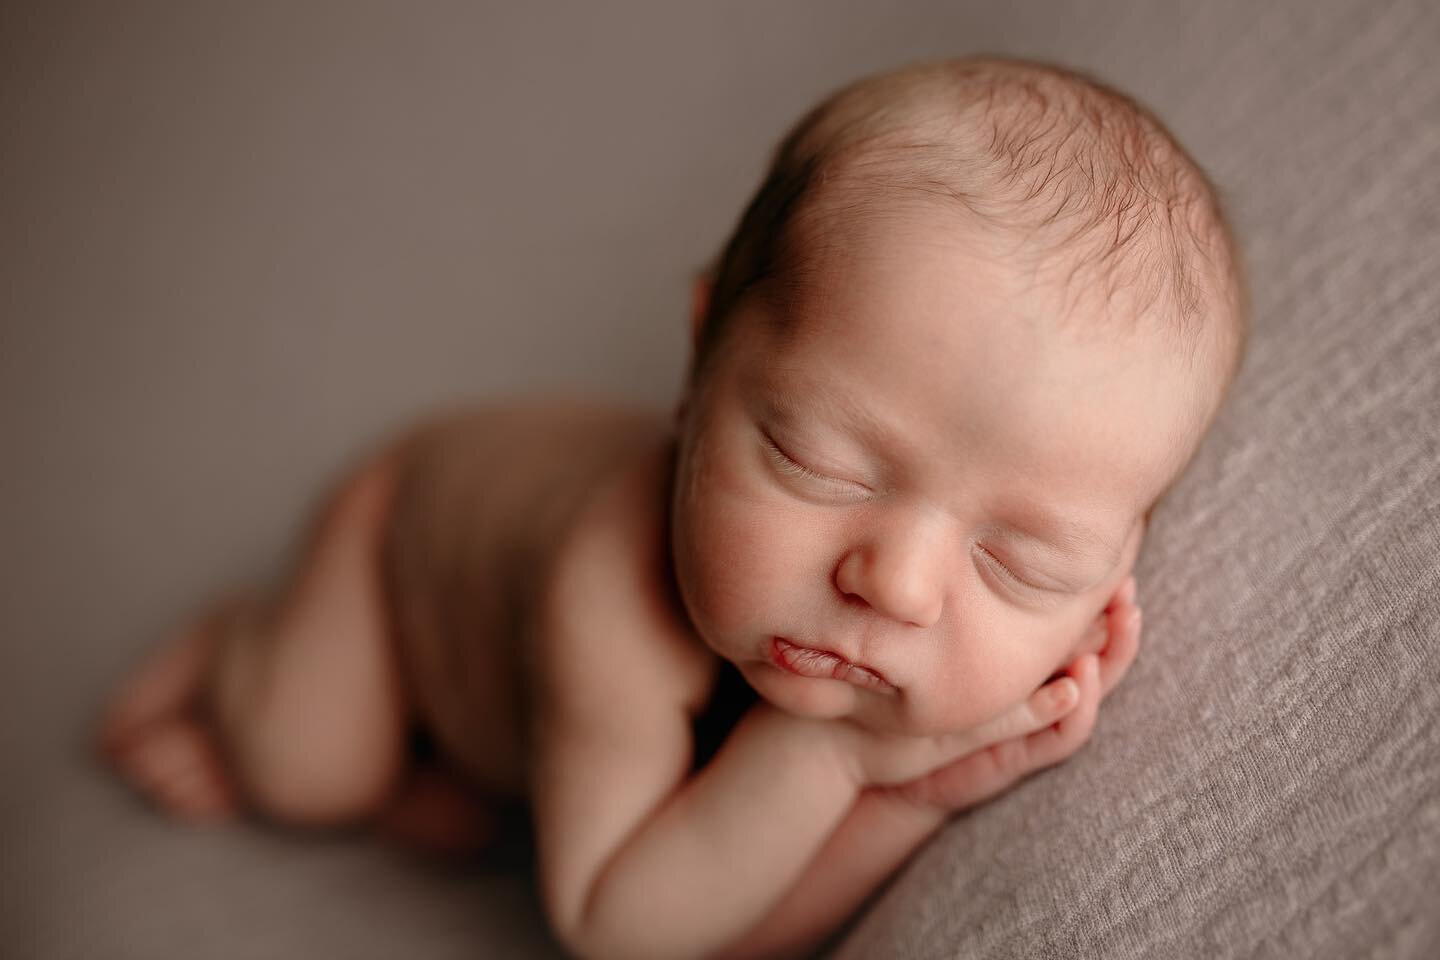 This crazy wind and rain is making the idea of a toasty newborn session sound necessary right now!